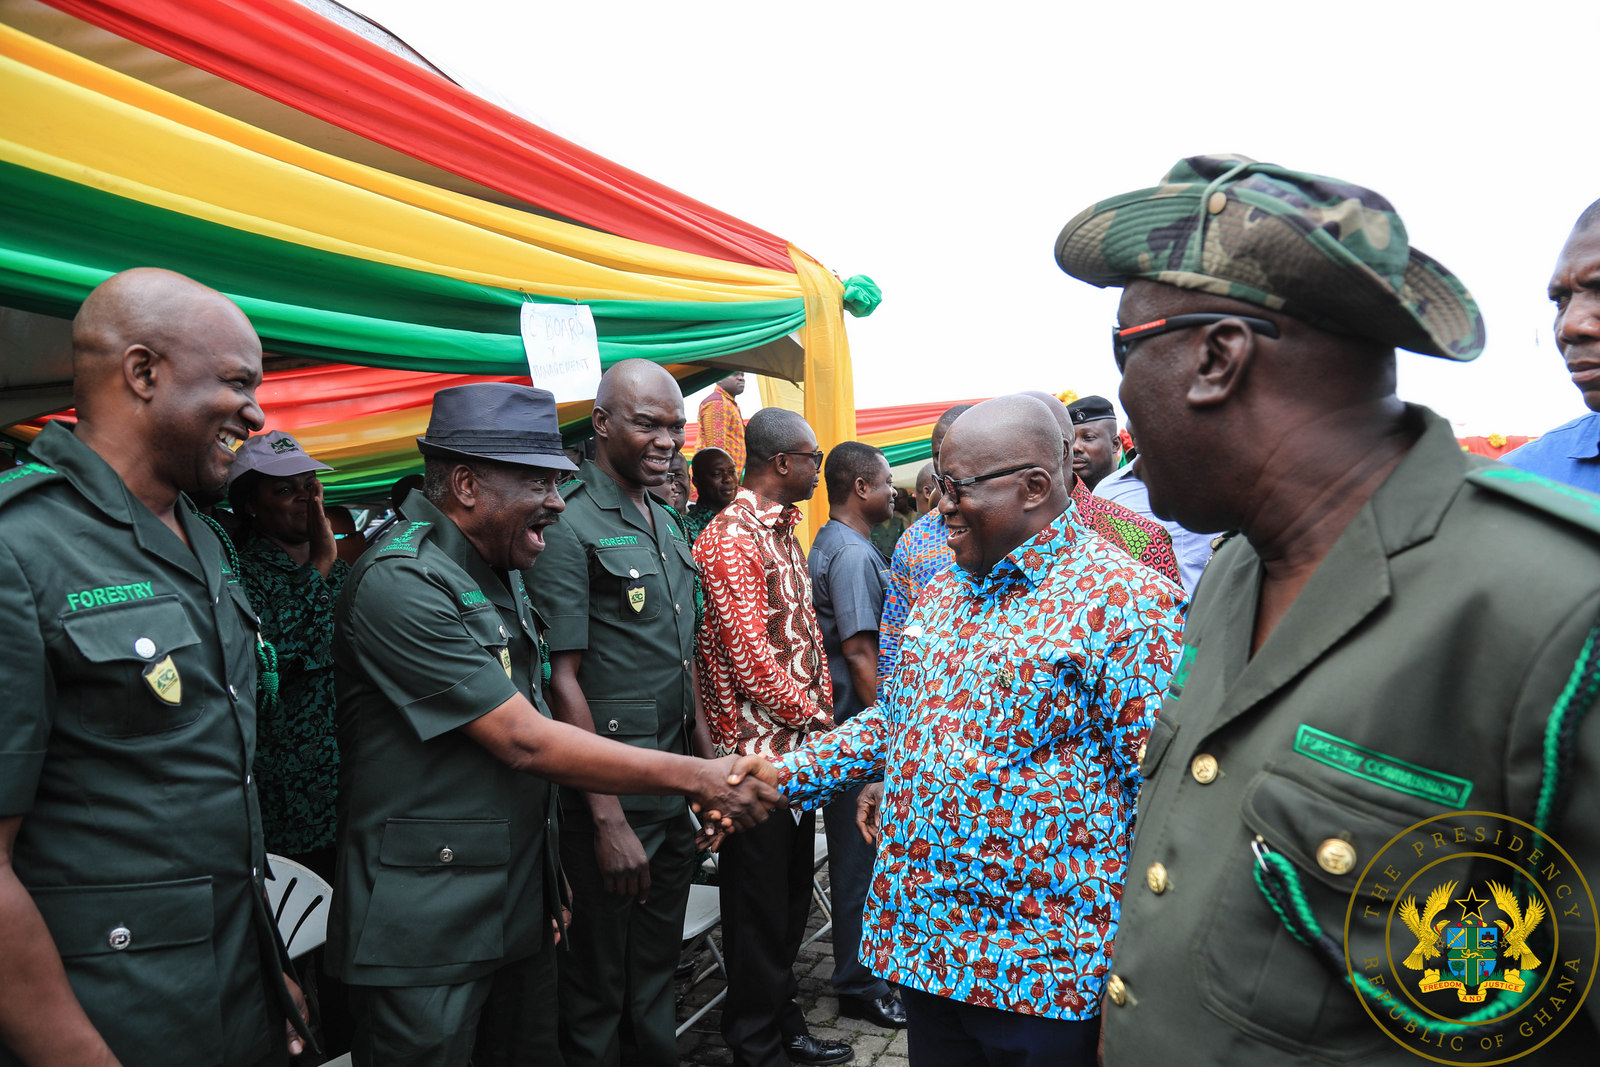 President Akufo-Addo exchanging pleasantries with the gathering